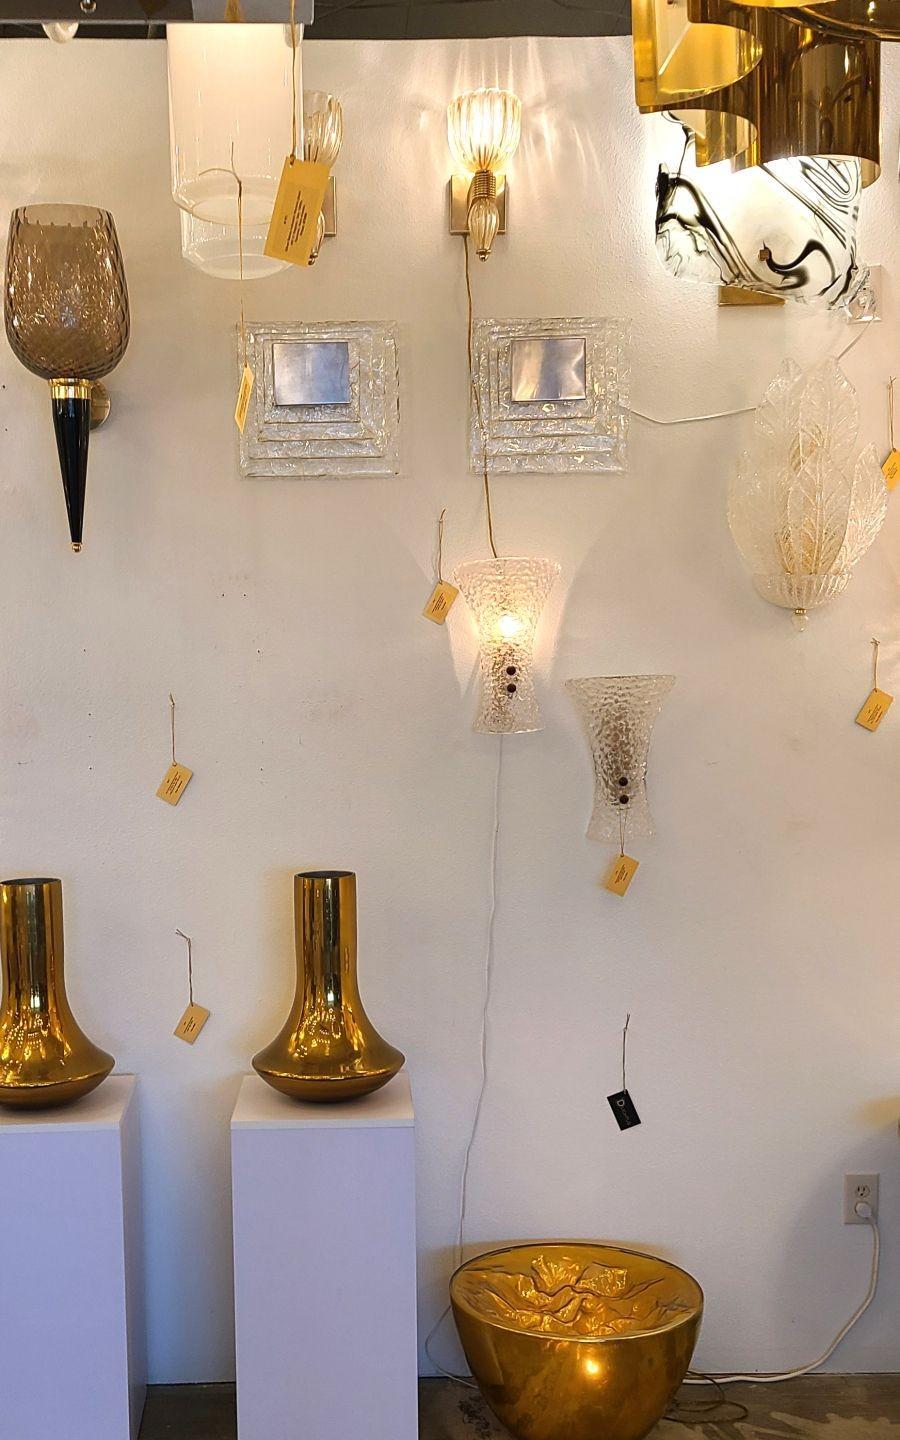 Pair of large square clear glass Mid Century Modern wall sconces, by Mazzega, Italy 1970s.
The vintage sconces are made of four square clear Murano glasses and a nickel one, nesting the two light bulbs.
The Murano sconces are professionally rewired